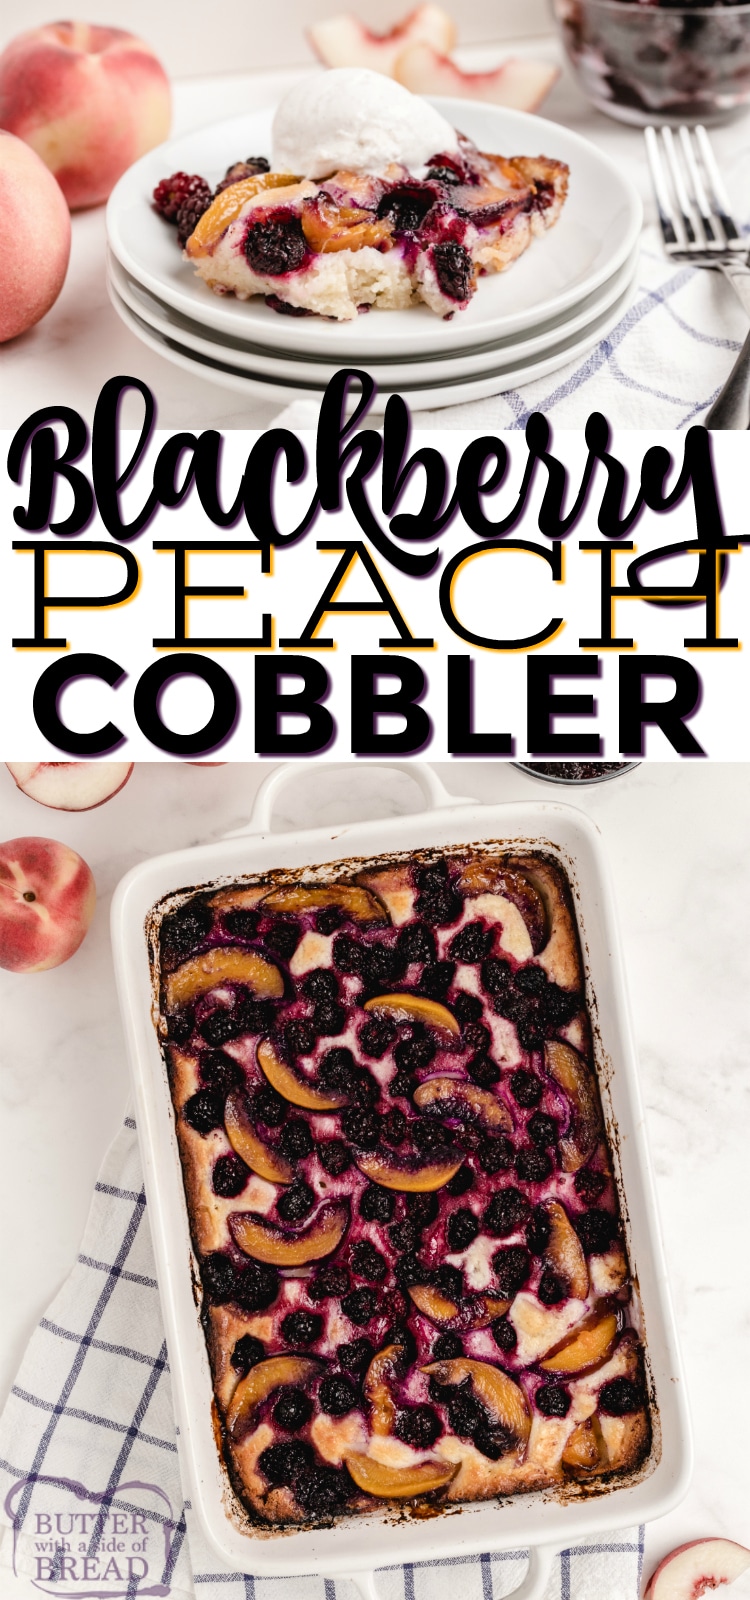 Blackberry Peach Cobbler is made with canned peaches, fresh blackberries and a few other simple ingredients. Make this easy cobbler recipe and treat your family and friends to a delightful and delicious dessert.